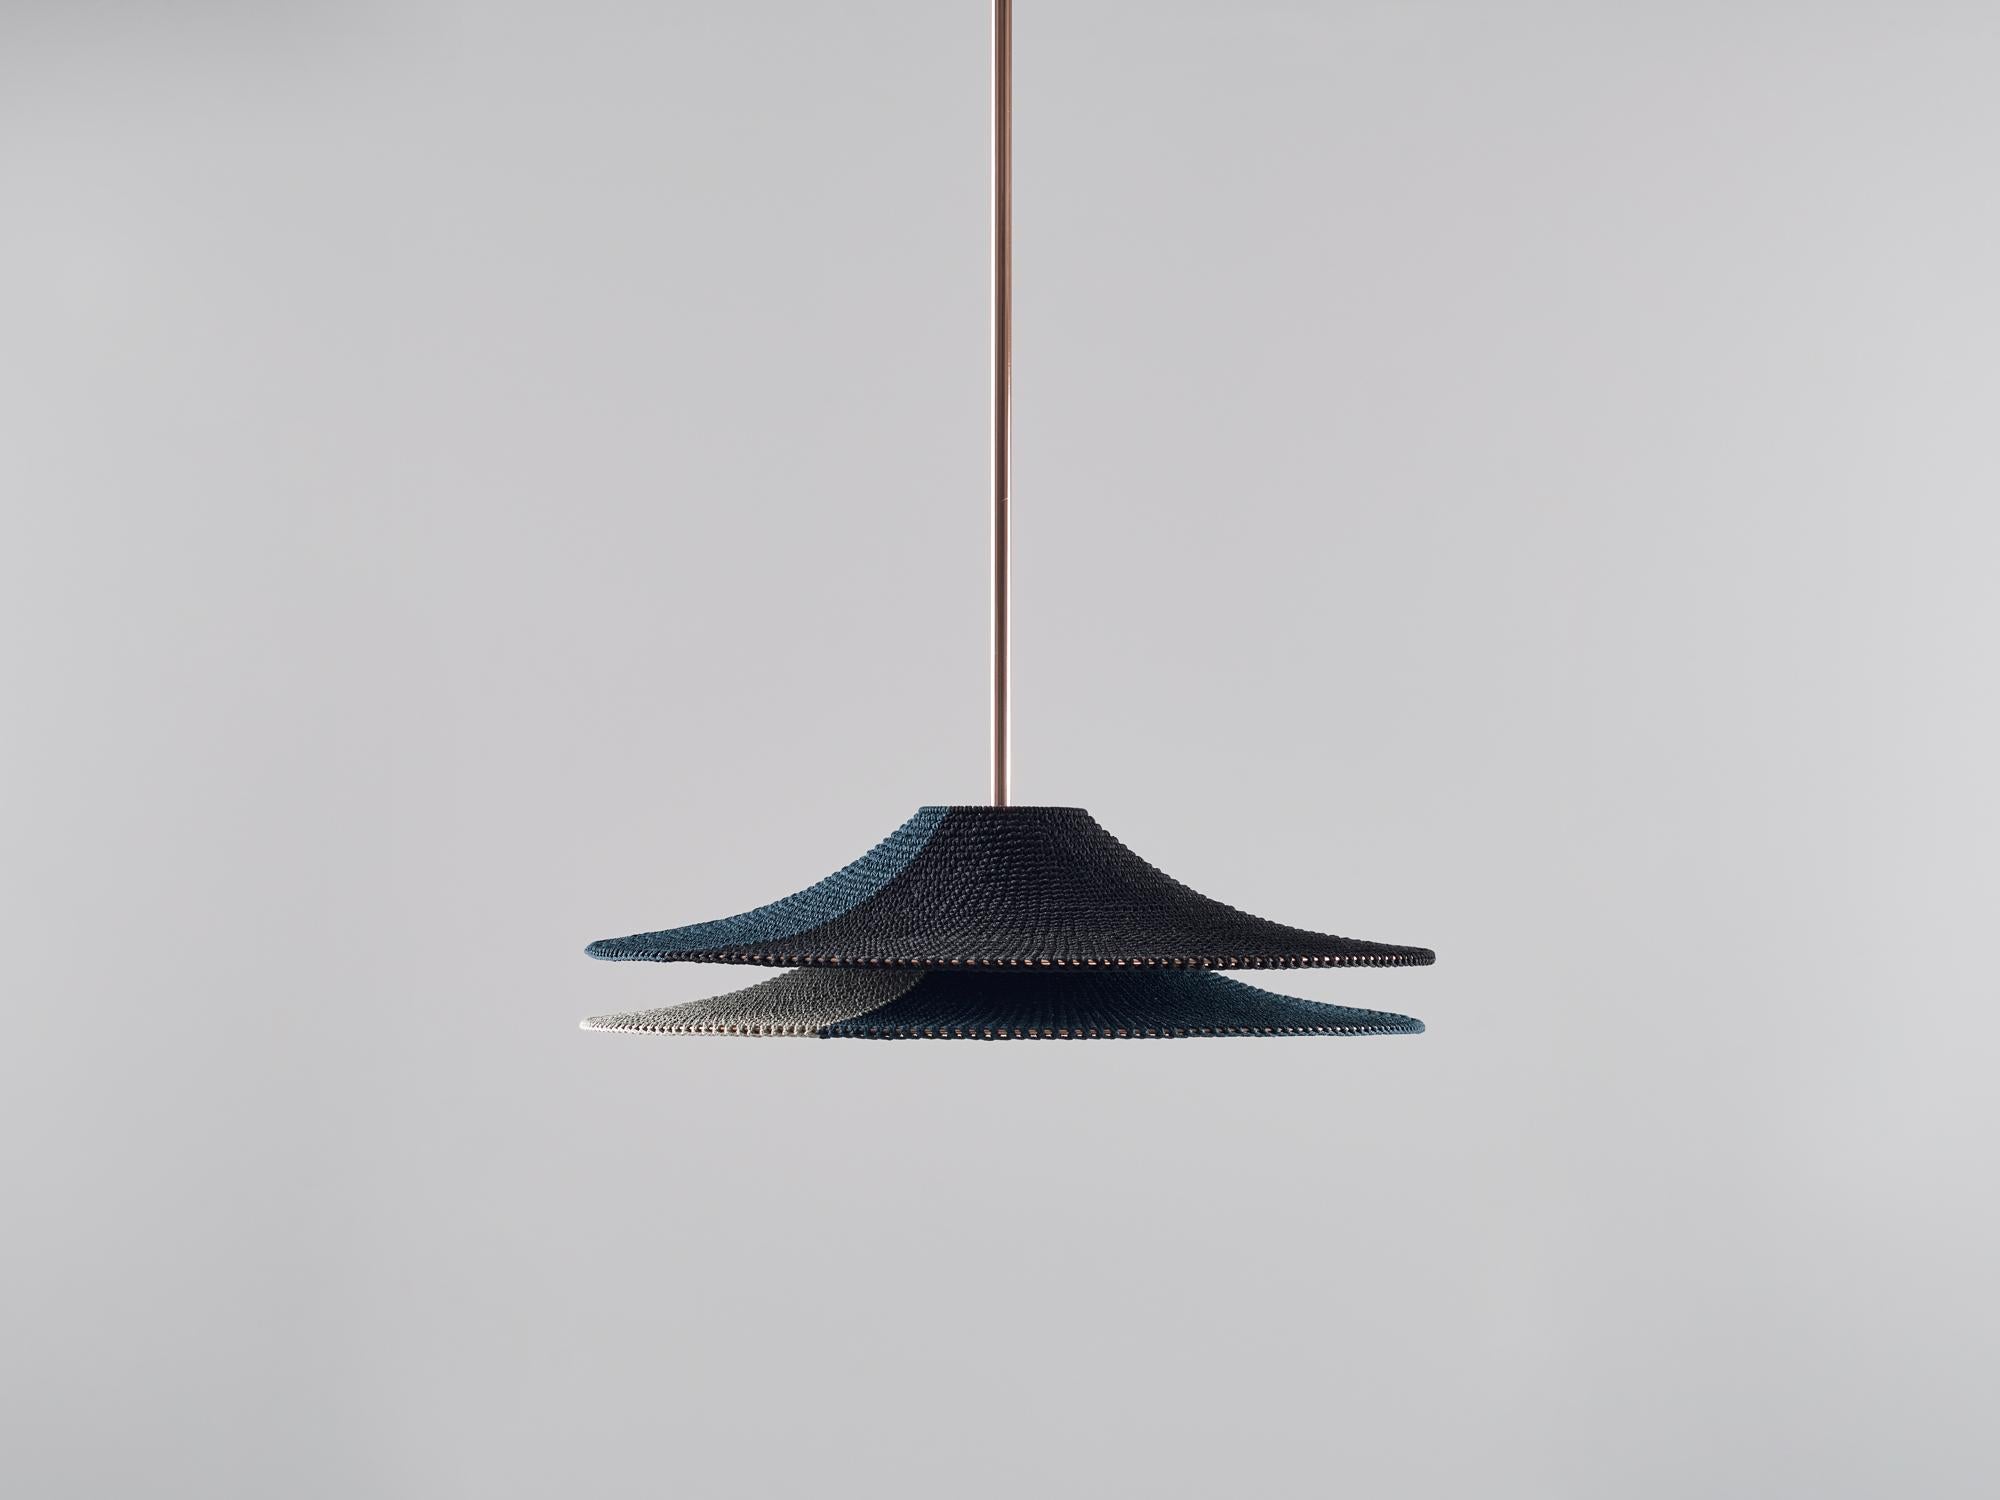 Small simple shade 02 50/50 pendant lamp by Naomi Paul
Dimensions: D 50 x H 14 cm
Materials: metal frame, Egyptian cotton cord.
Colors: black and Deepsea, Deepsea and Putty.
Available in other colors and in 3 sizes: D50, D60, D80 cm.
Available